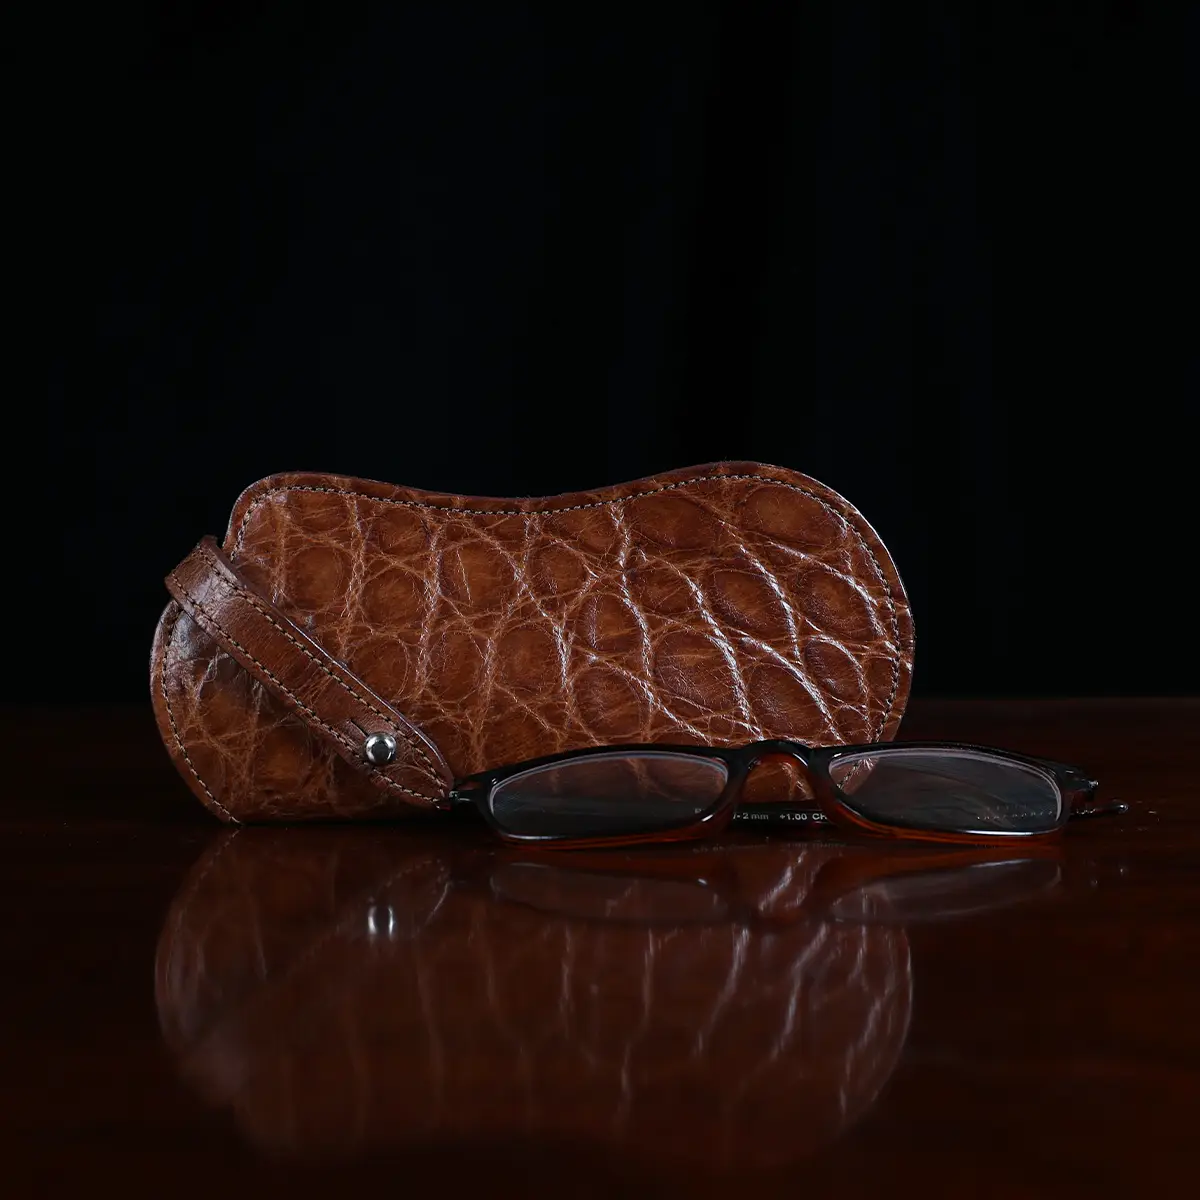 No. 2 Eyecase Glasses Case in Brown American Alligator with glasses- ID 001 - front view on black background